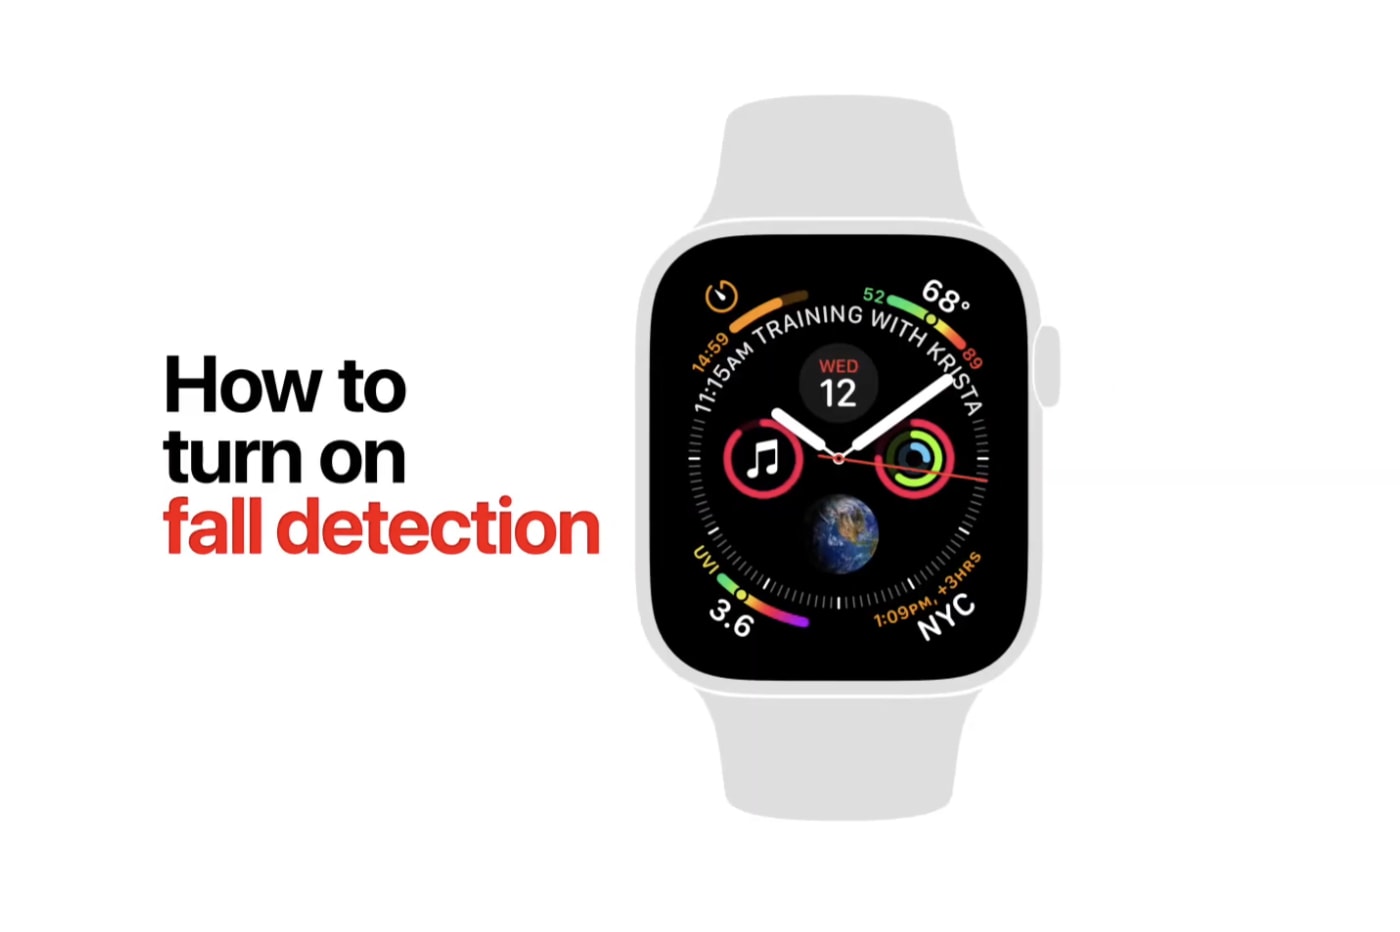 Fall detection ad from Apple